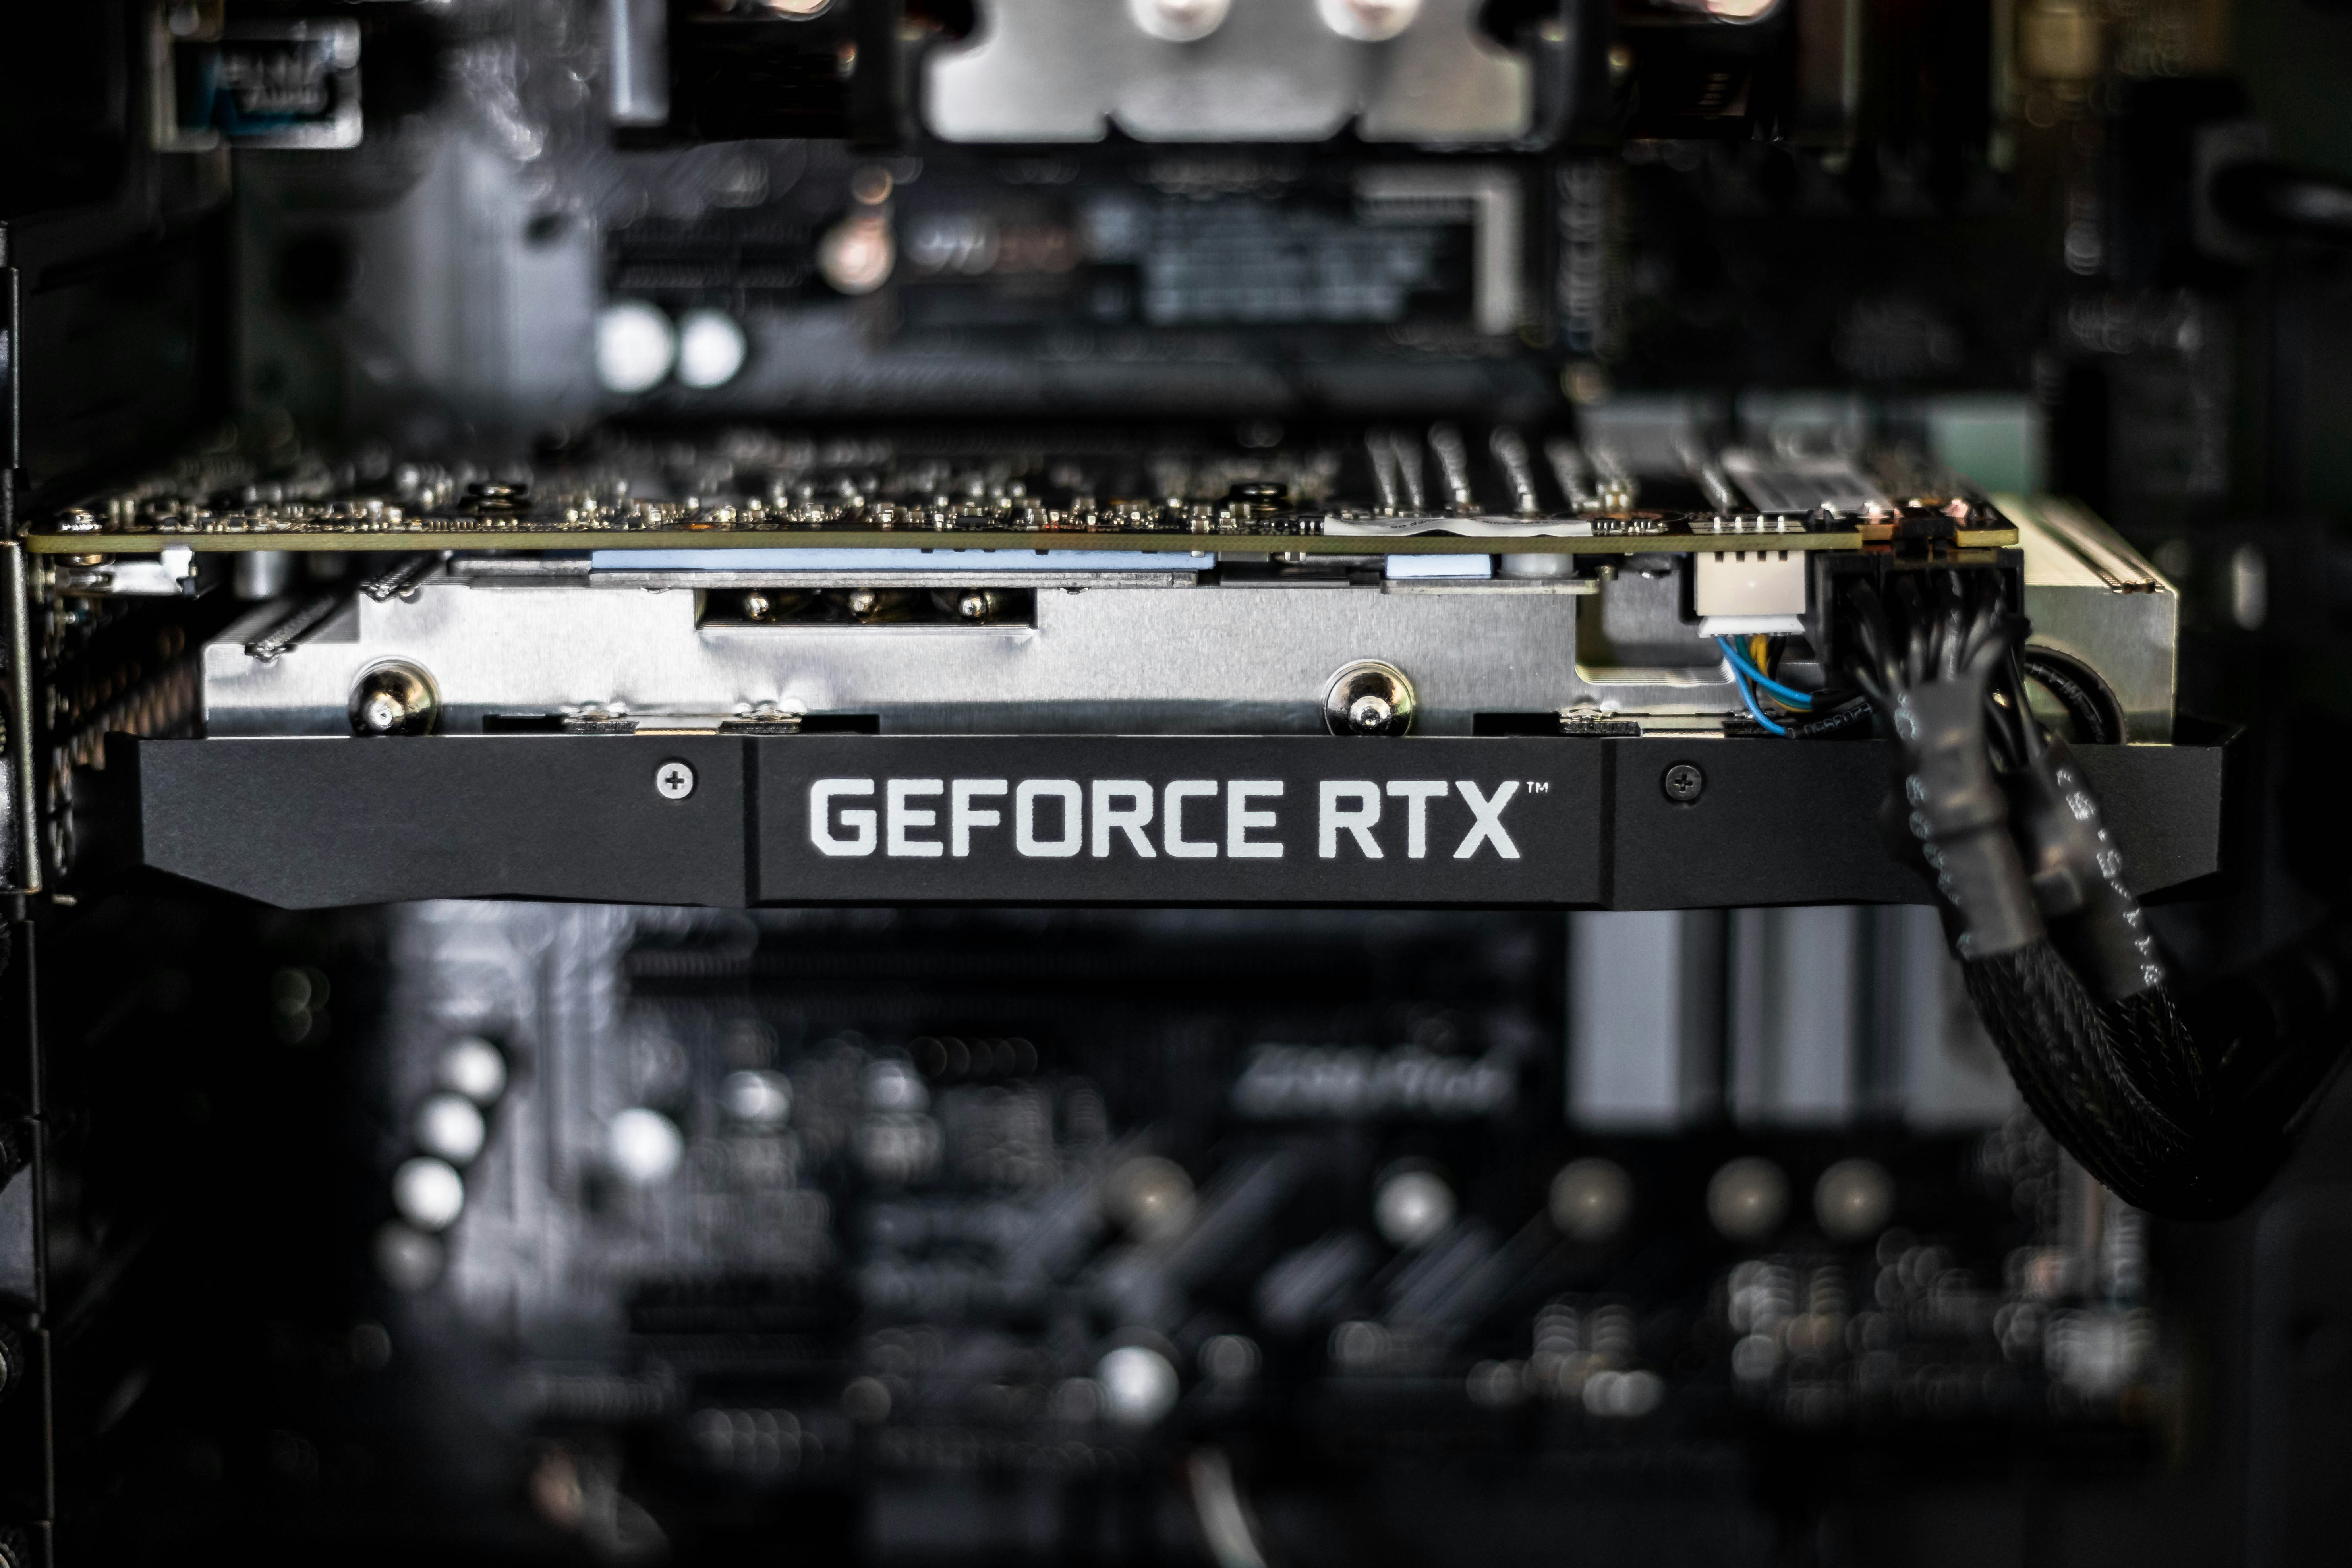 selective focus photography of GEFORCE RTX graphics card